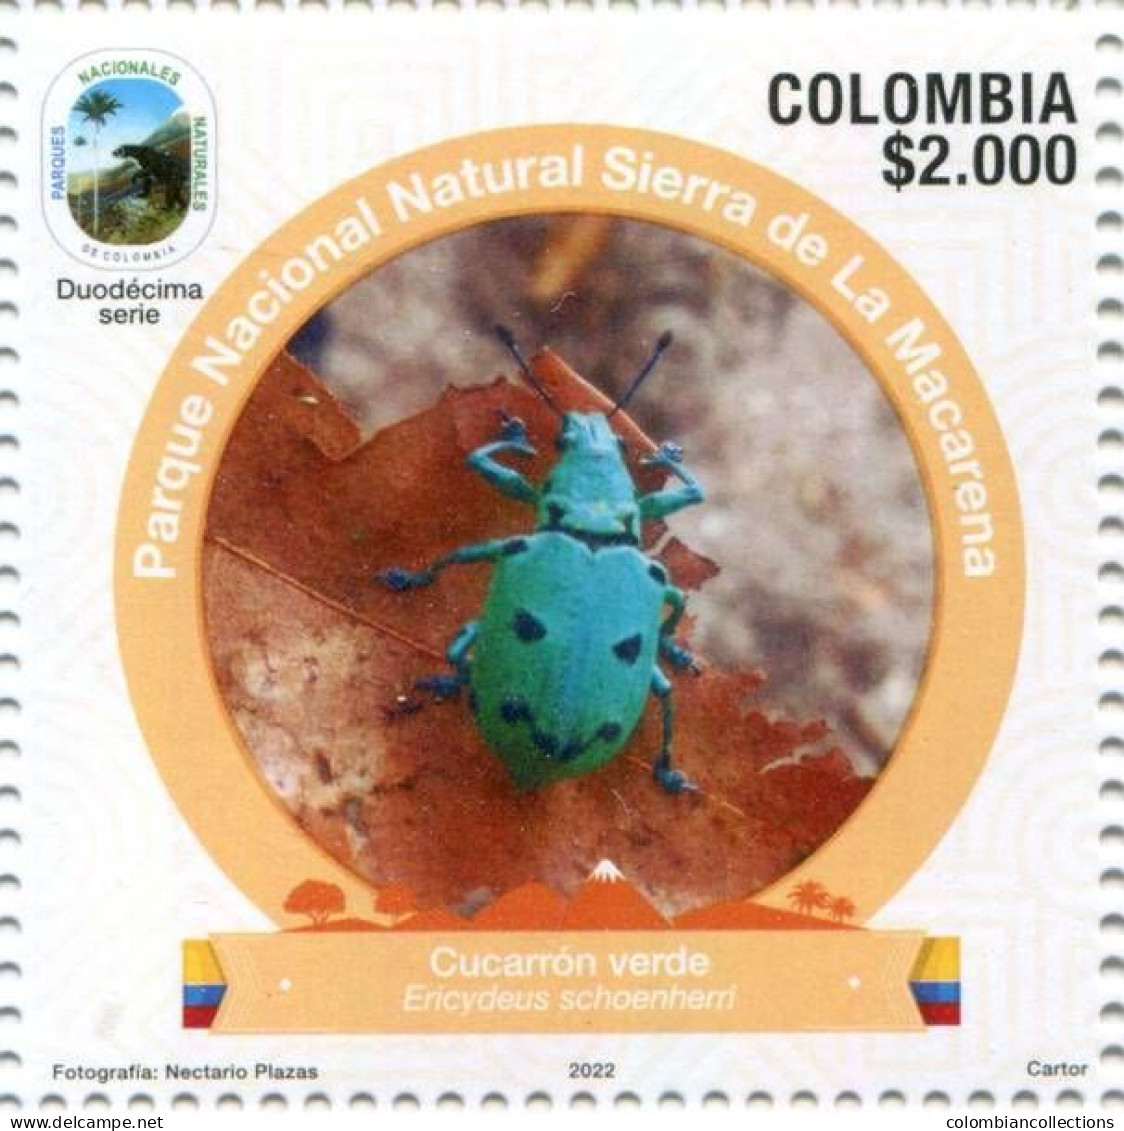 Lote 2022-24.3, Colombia, 2022, Sello, Stamp, Parques Nacionales, National Park 12 Issue, Cucarron, Insecto, Insect - Colombia